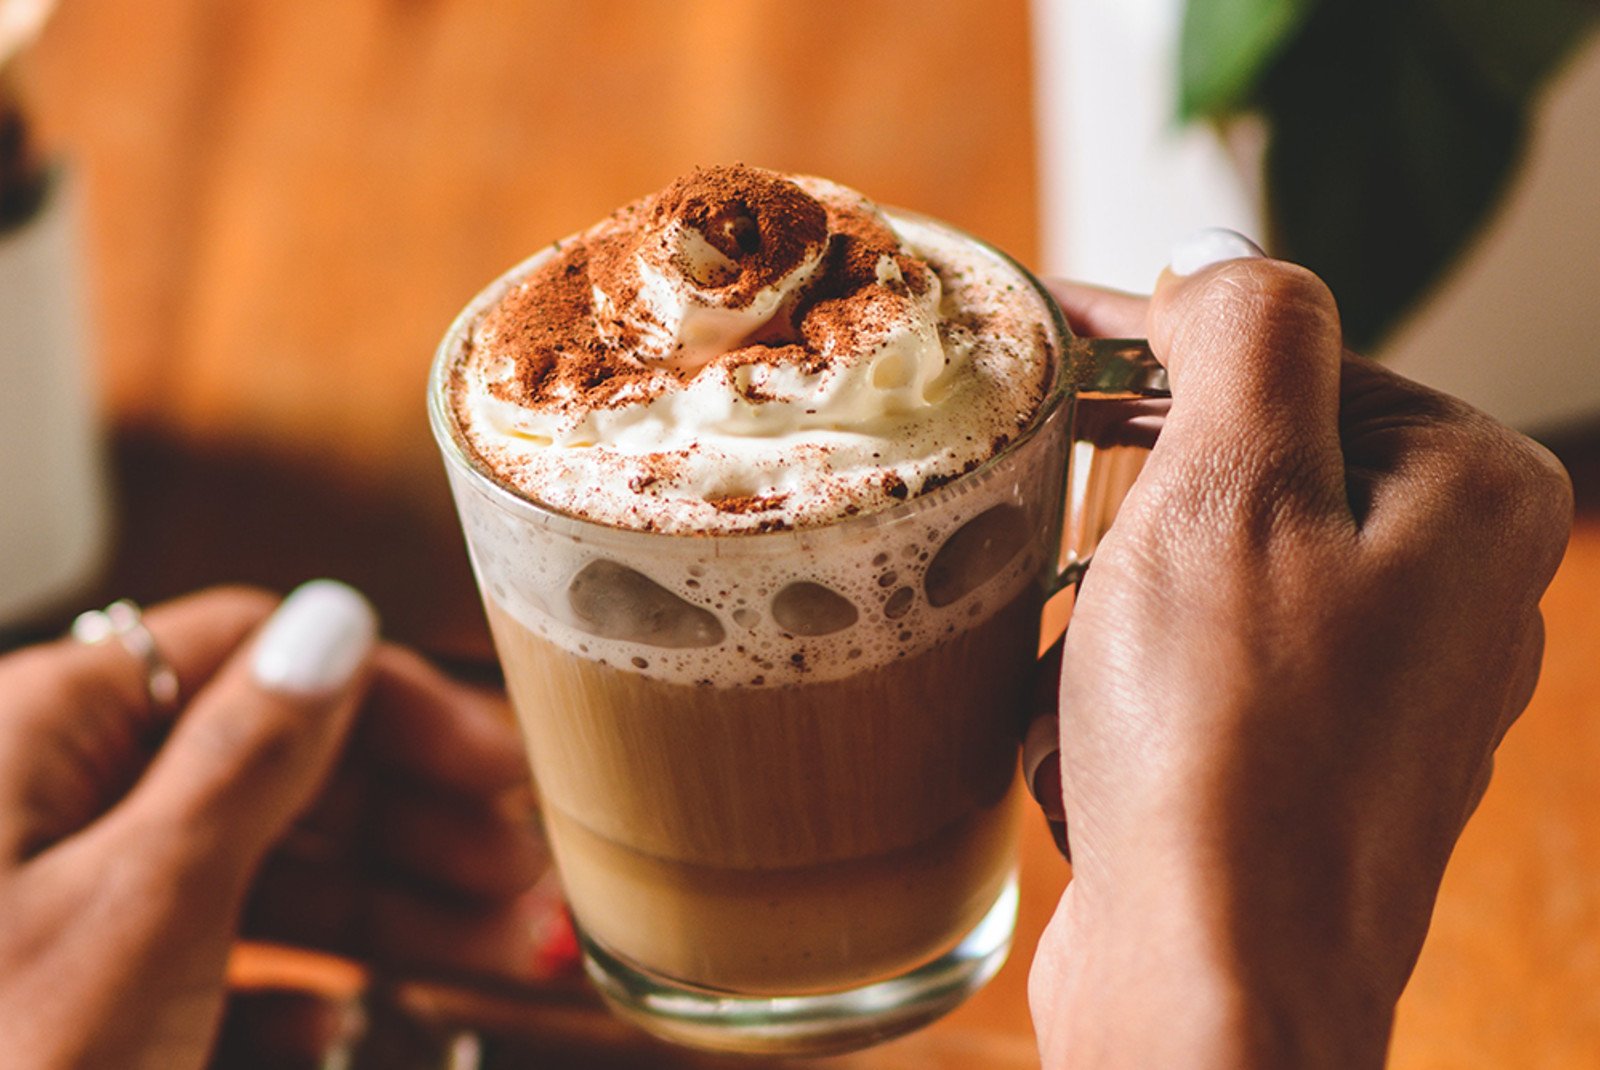 Hot chocolate in a glass mug with whipped cream and cinnamon held by a woman's hands with white nail polish and a wooden floor and green plant in the background